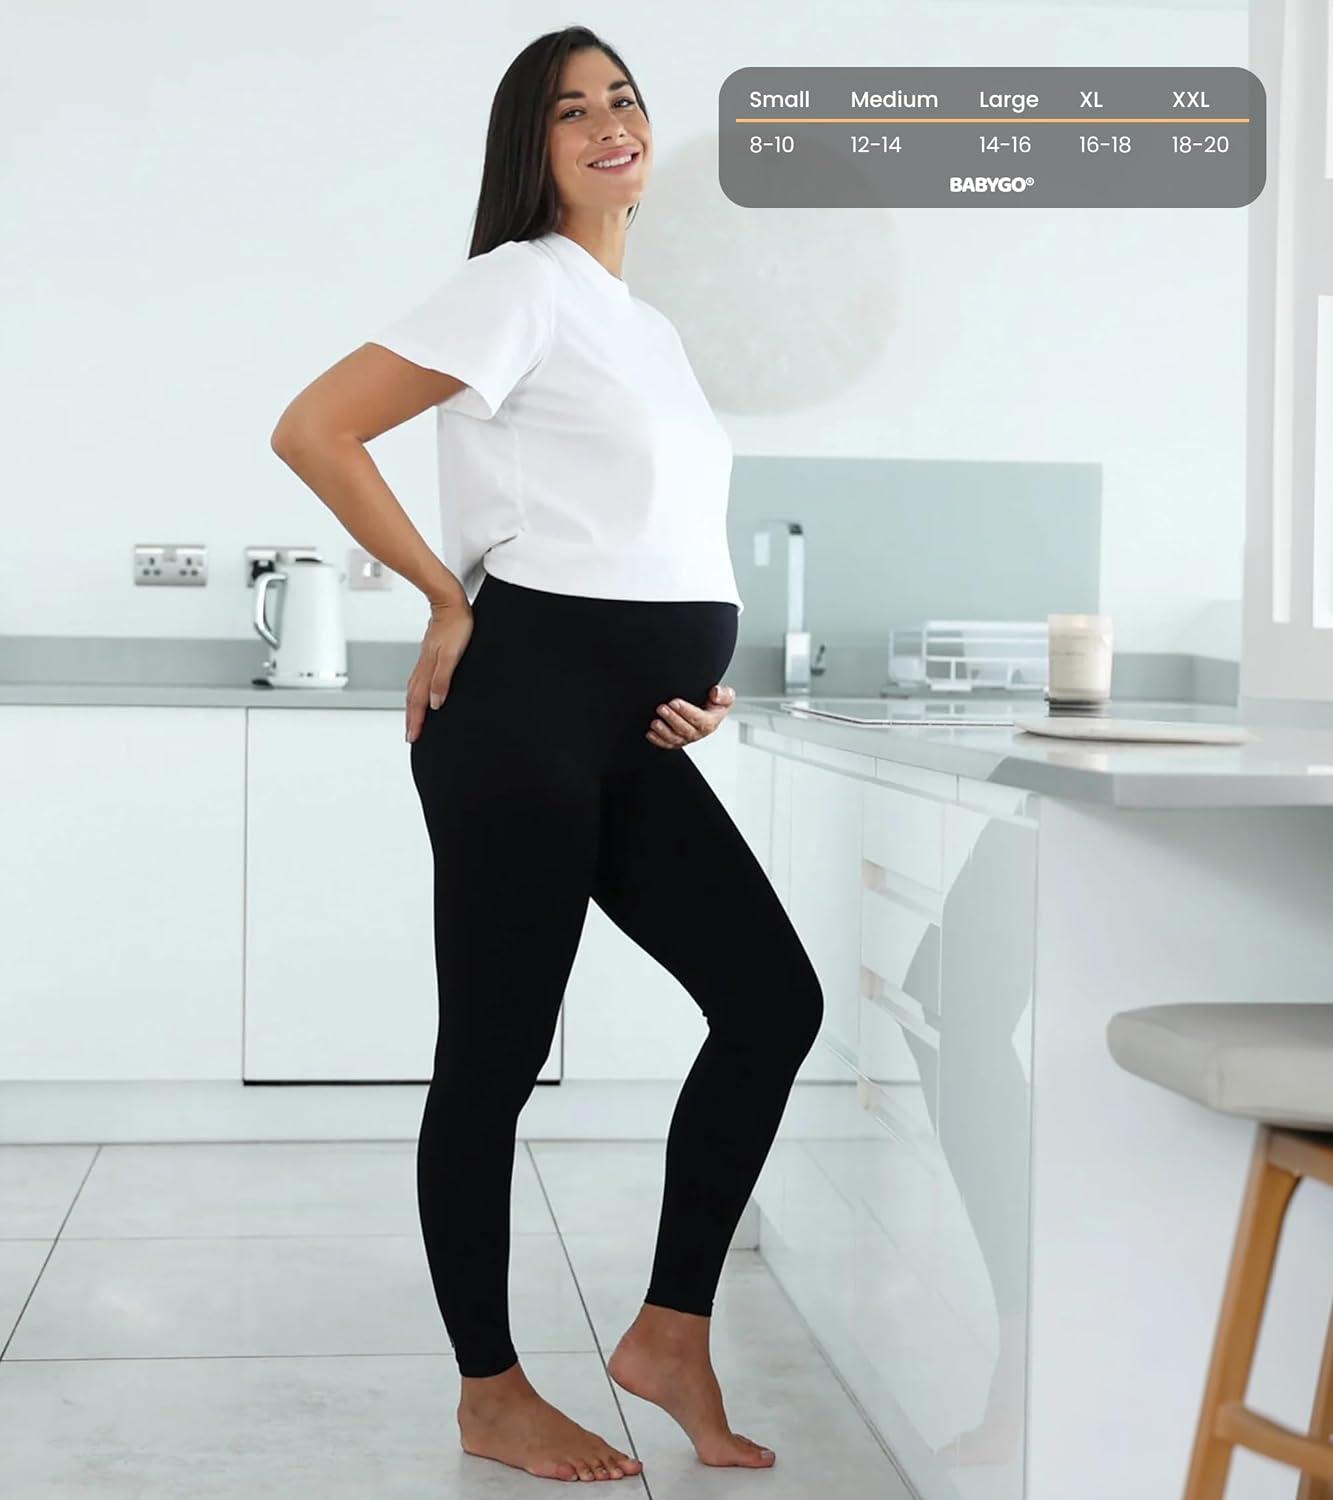 BABYGO Maternity Leggings TriStretch for Pregnant Women, Seamless Over The  Bump Pregnancy Comfort Wear